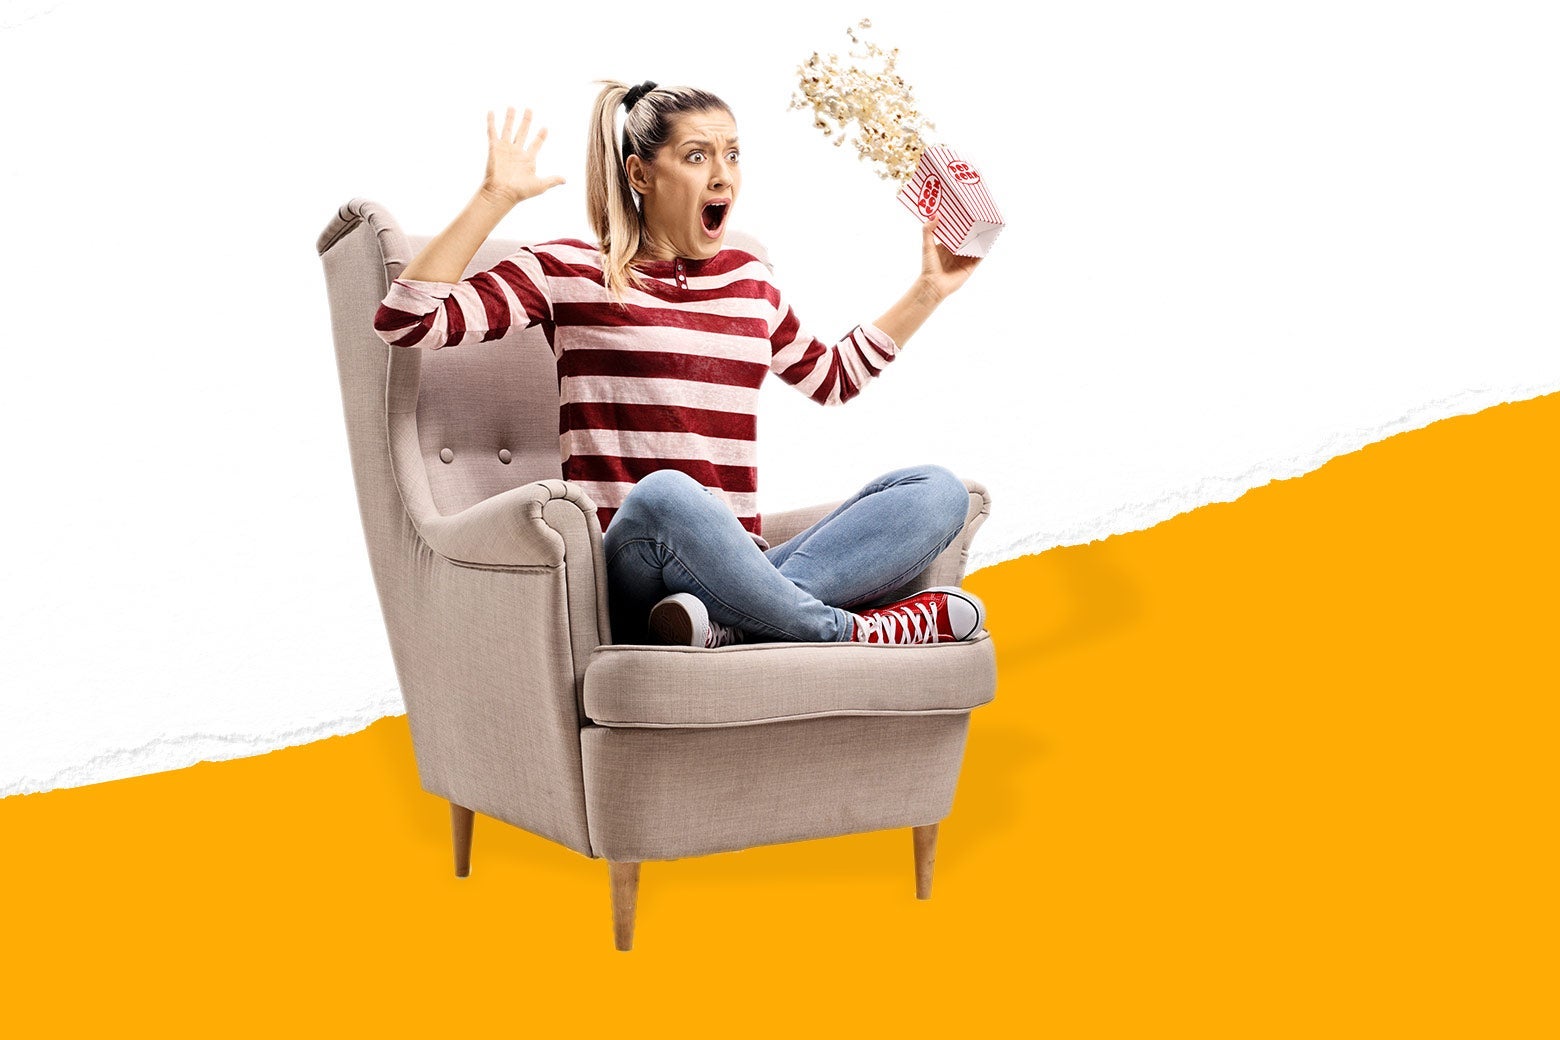 A woman sitting cross-legged on an easy chair throws her arms up, making the popcorn she was holding in her hand spill.